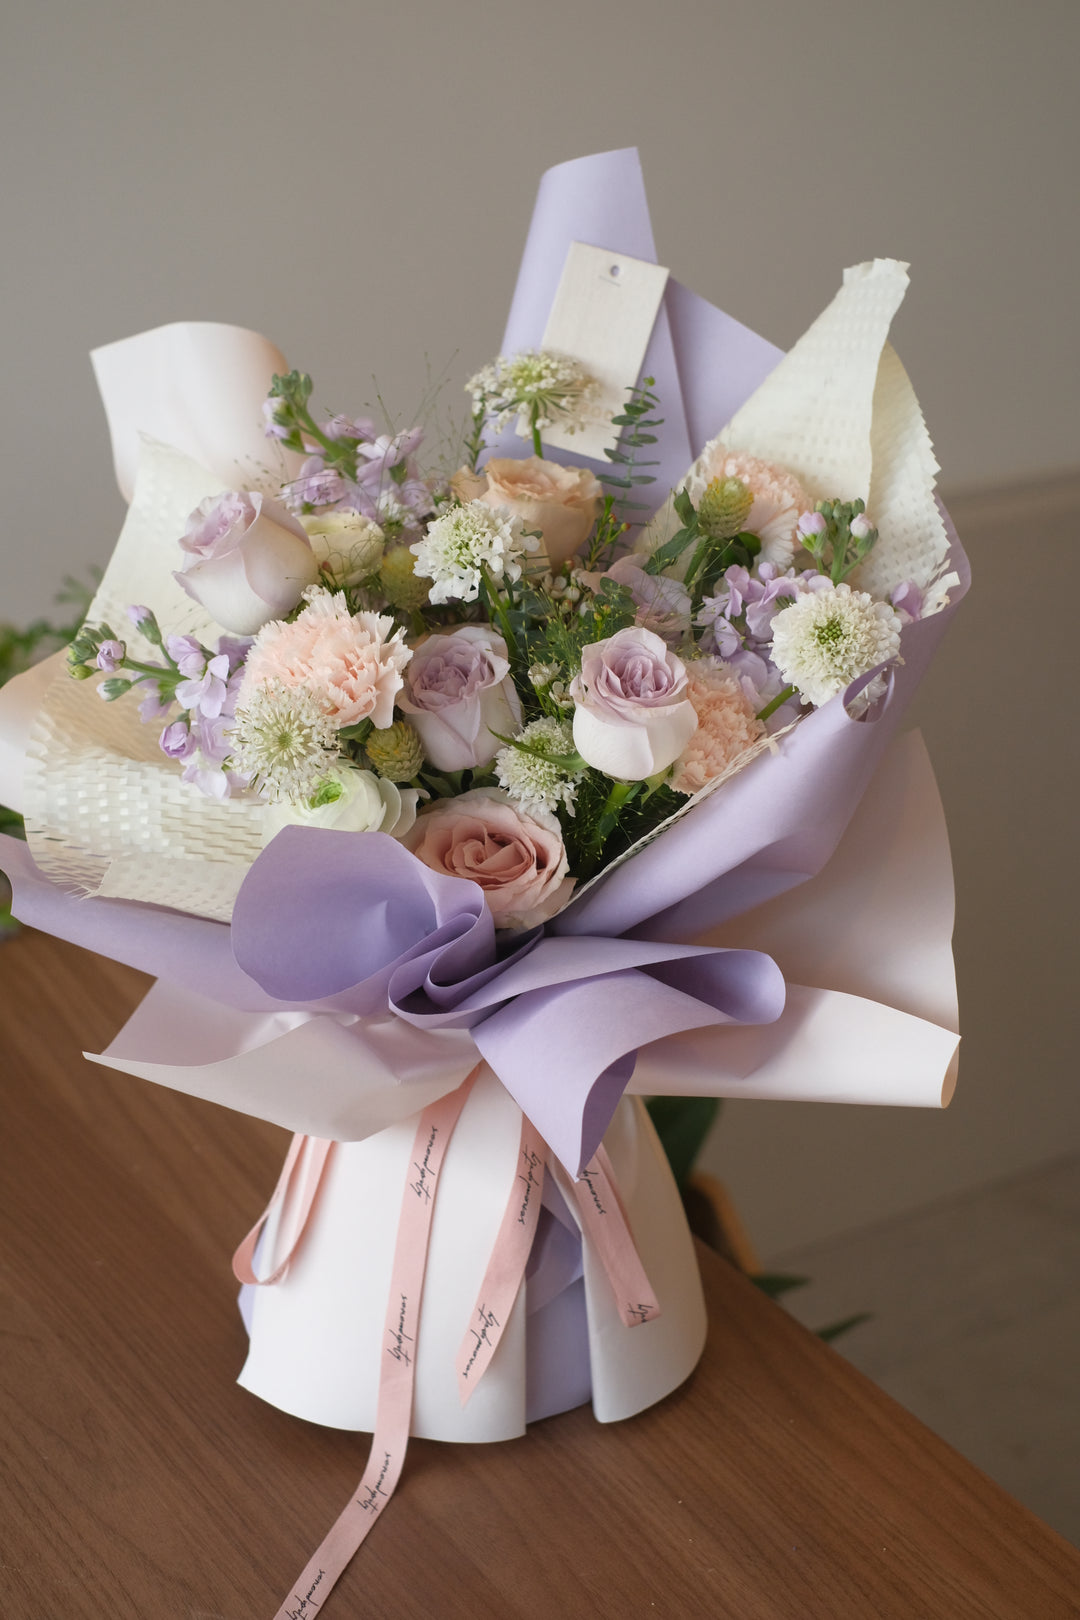 Exquisite bouquet of purple pastel flowers being delivered in Penang, symbolizing elegance and grace in floral arrangements."